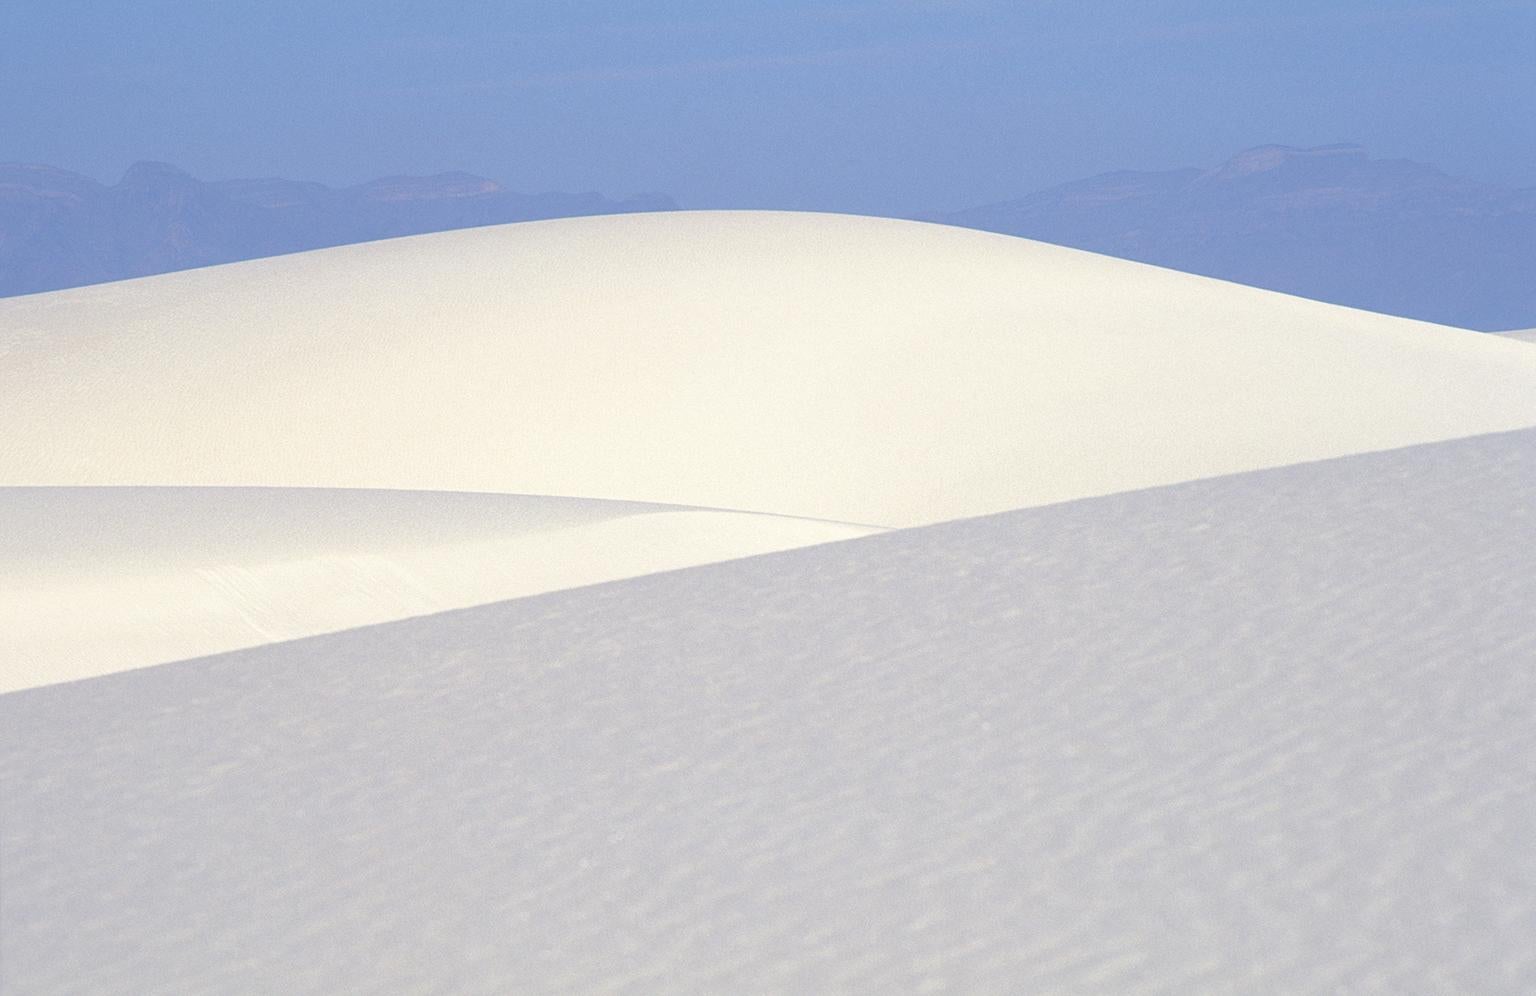  Cosmo Condina Landscape Photograph - White Sands National Park, USA, 2004, Vers. 1